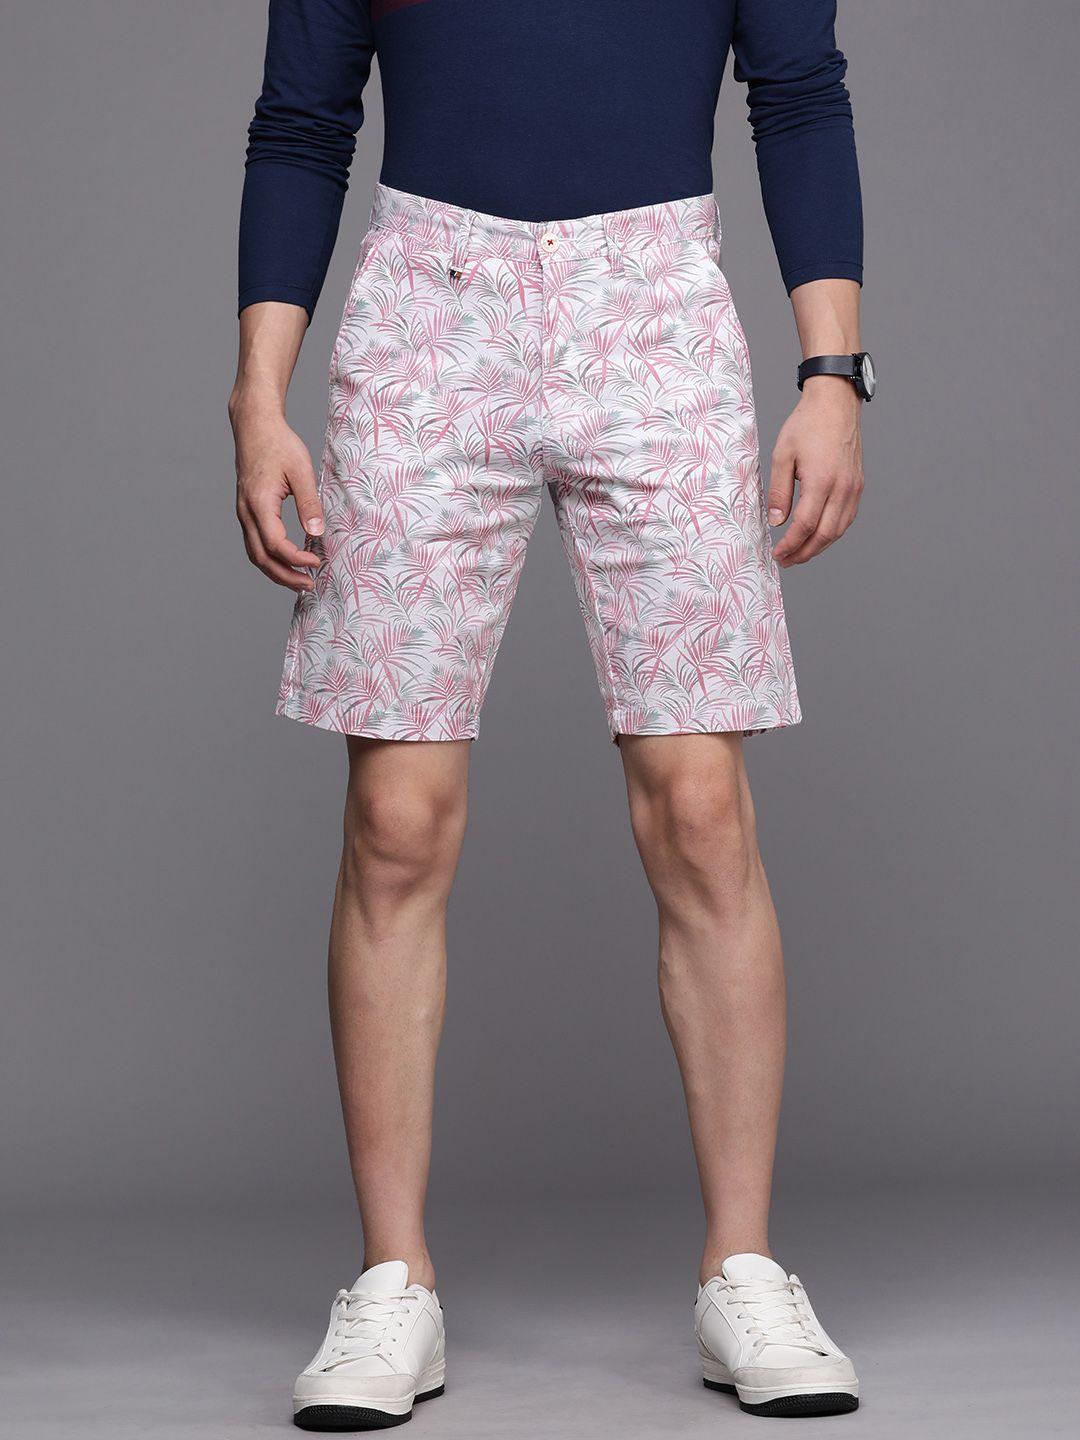 louis philippe sport men white & pink tropical printed slim fit shorts